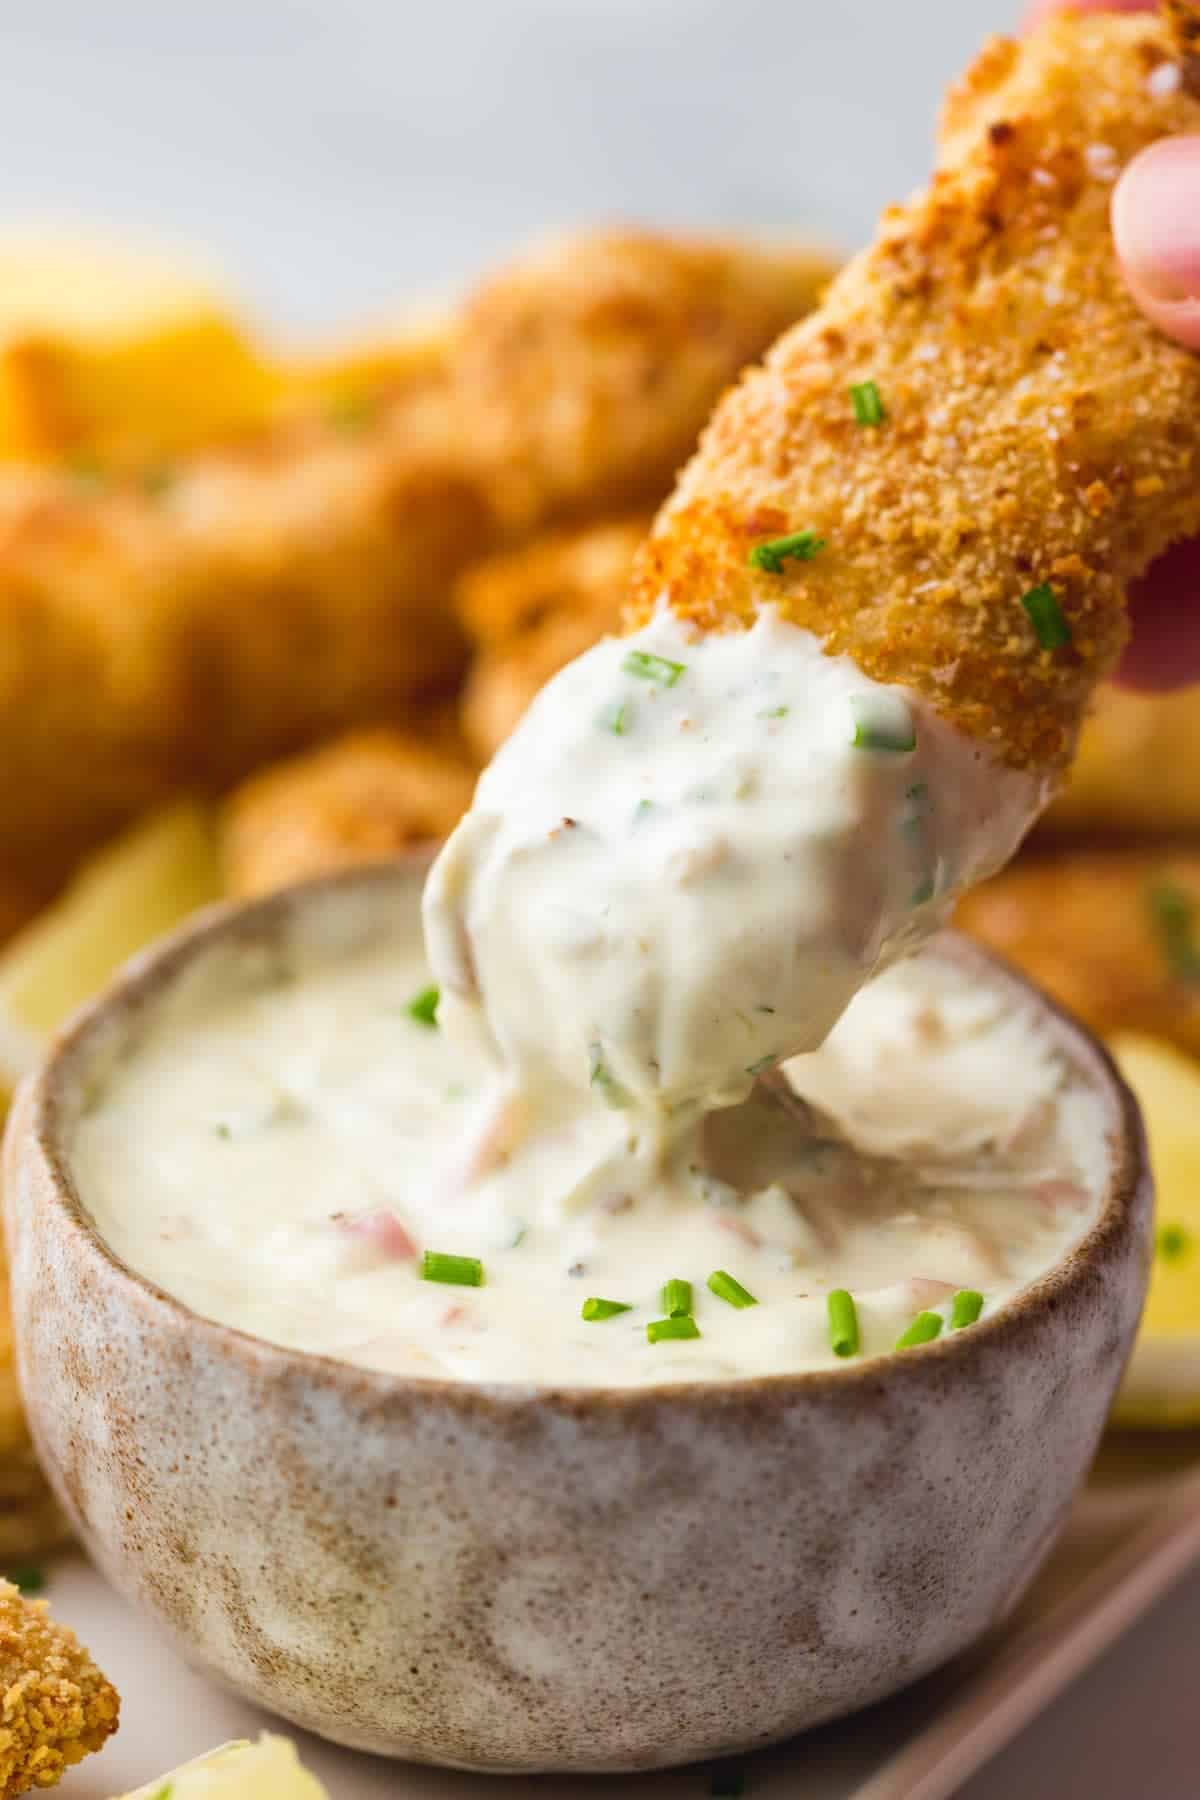 Dipping a fish stick in homemade tartar sauce, garnished with chives